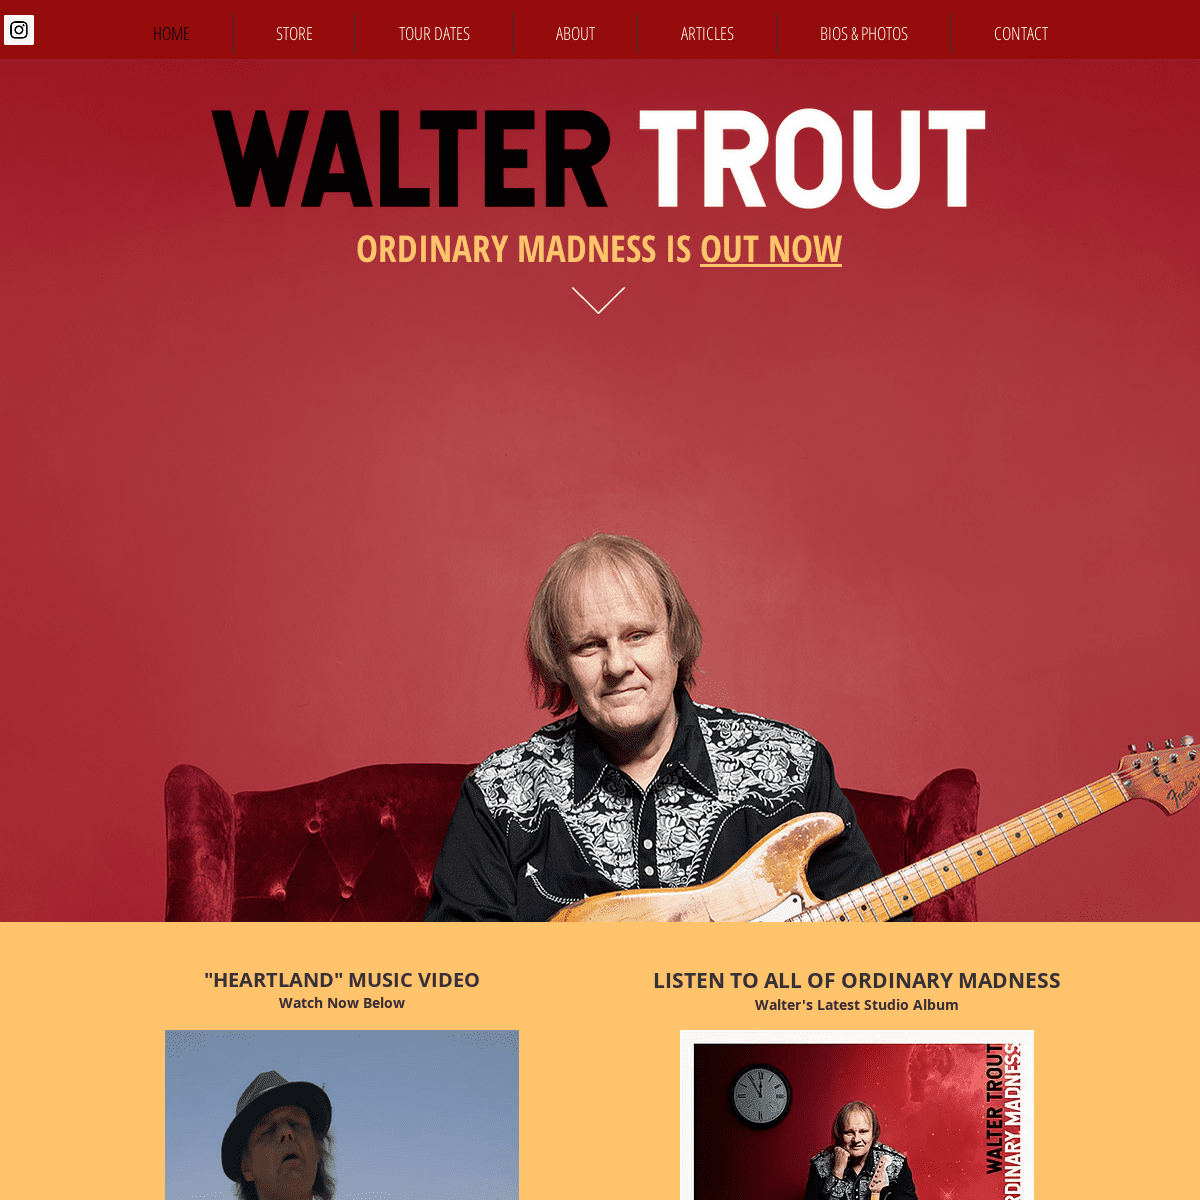 A complete backup of https://waltertrout.com